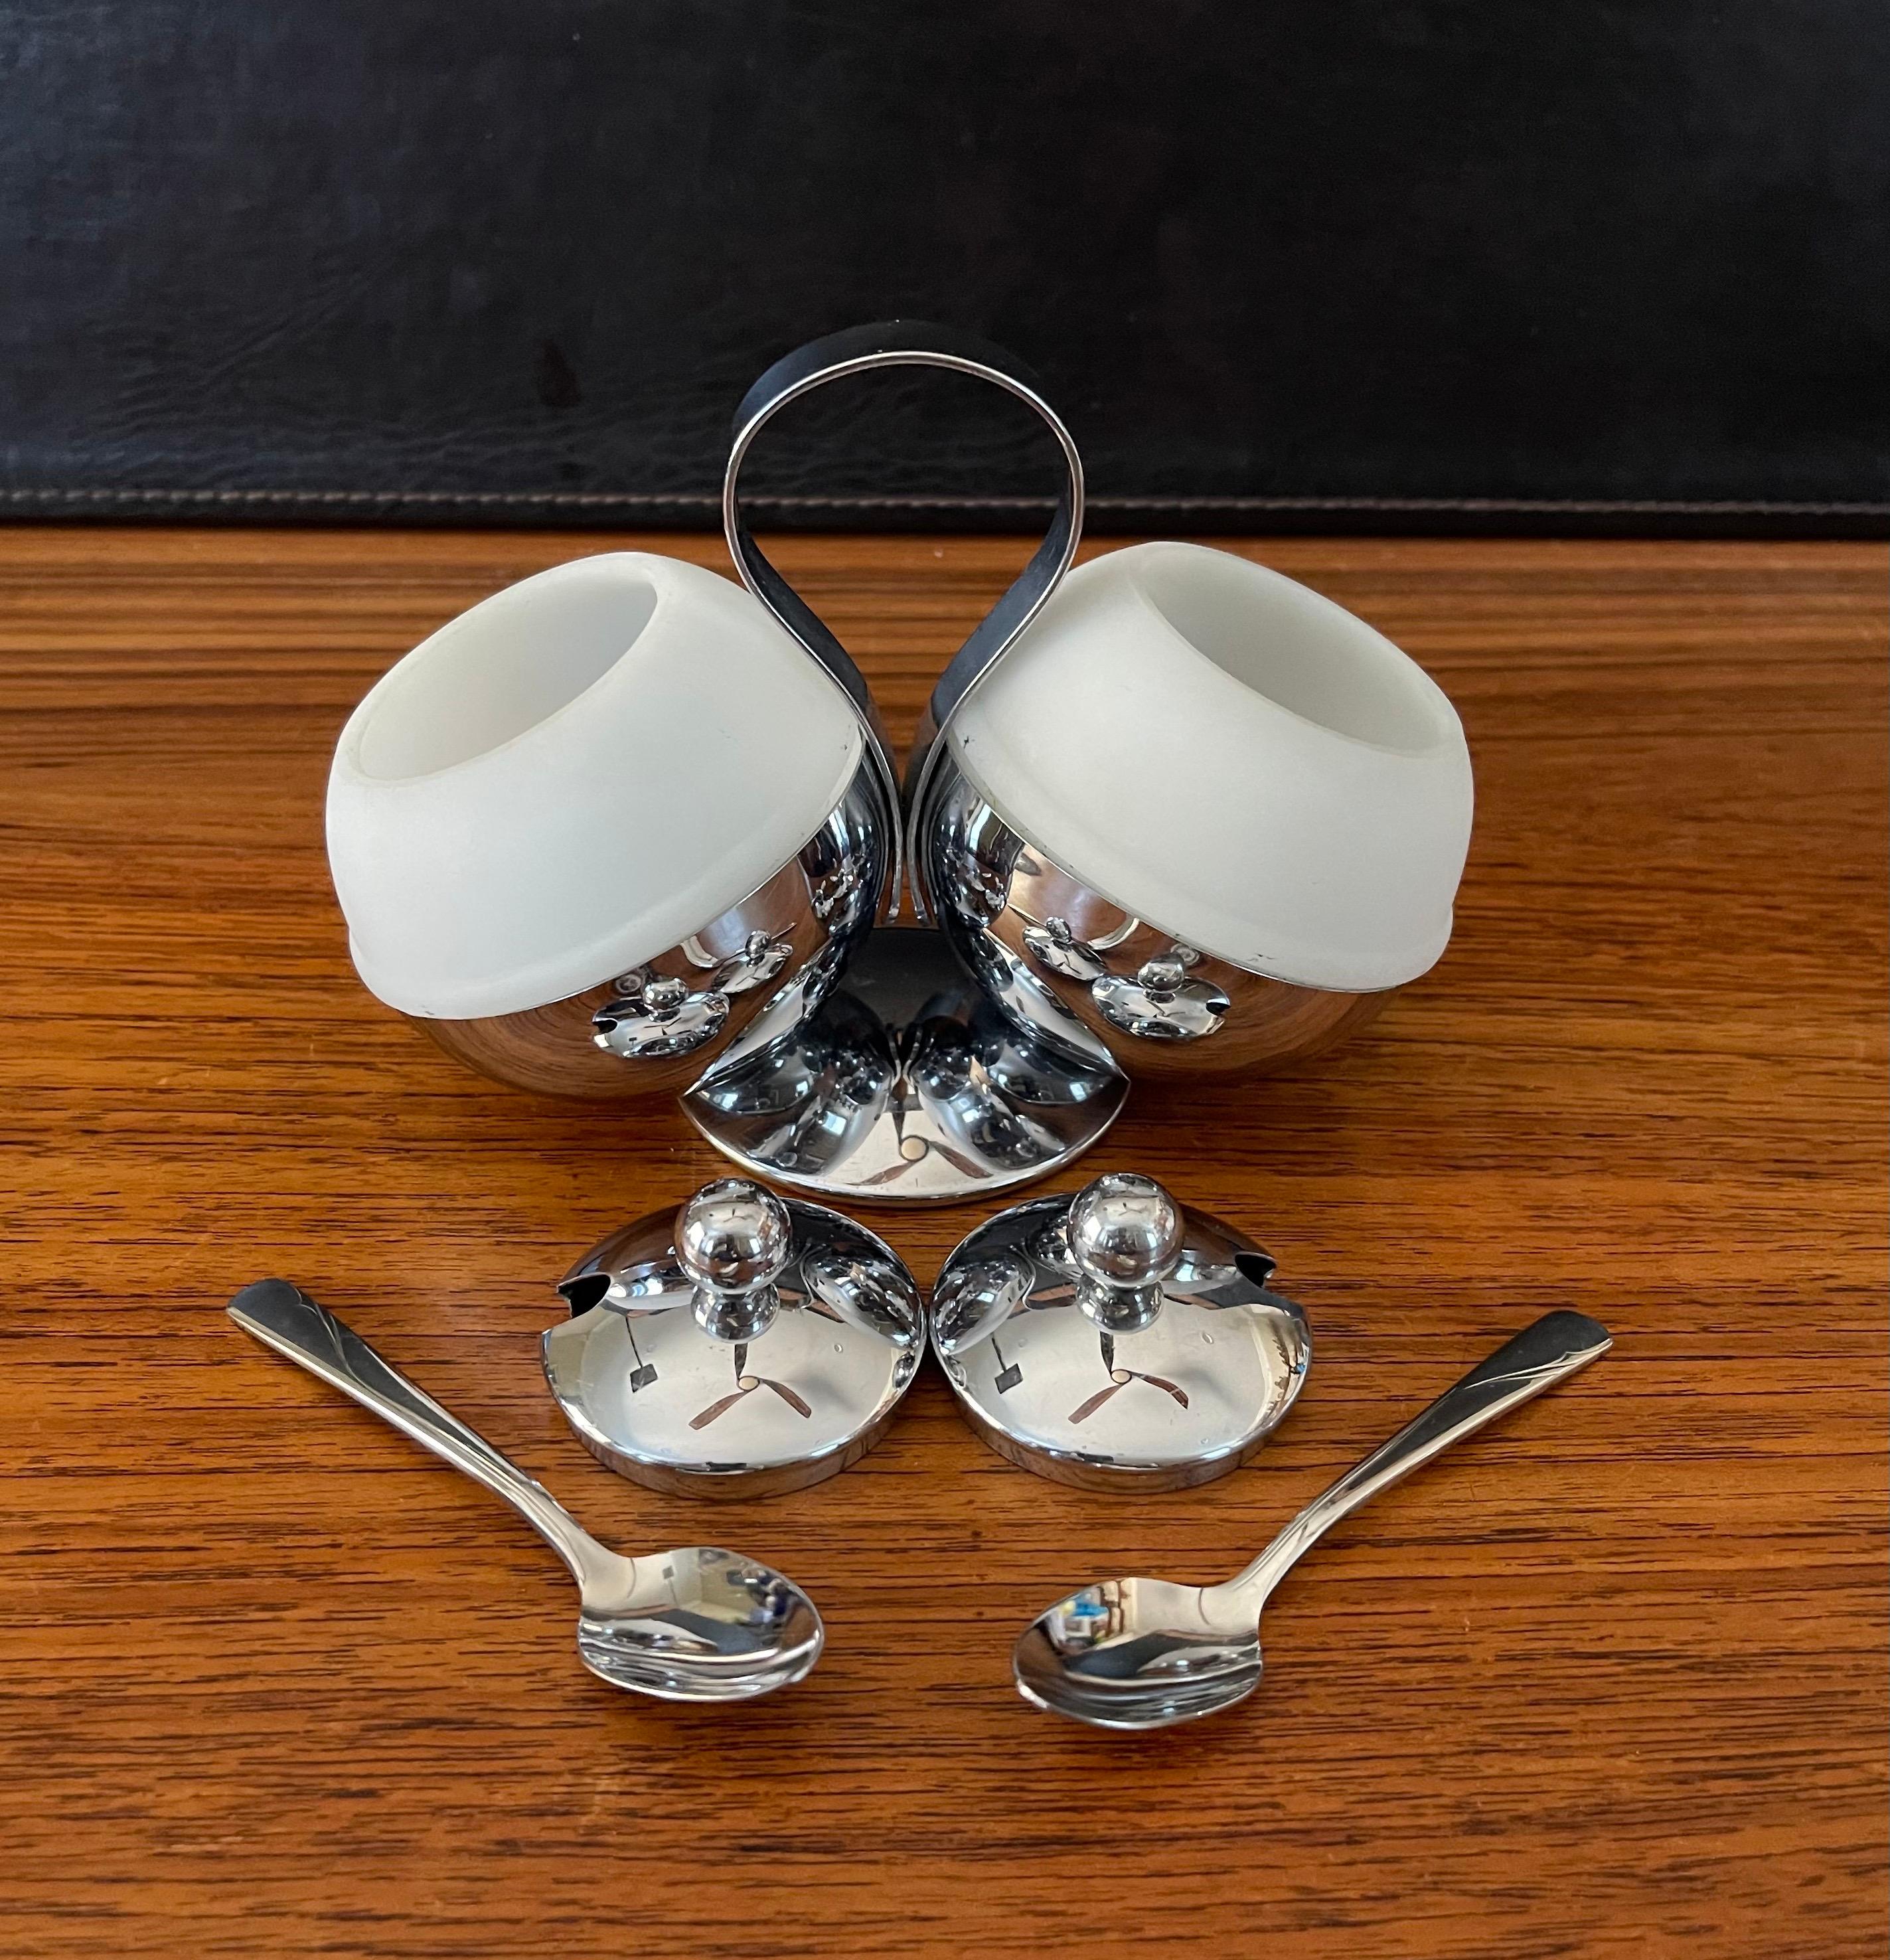 Art Deco Chrome & Glass Double Condiment Server with Spoons by Chase & Co. For Sale 2